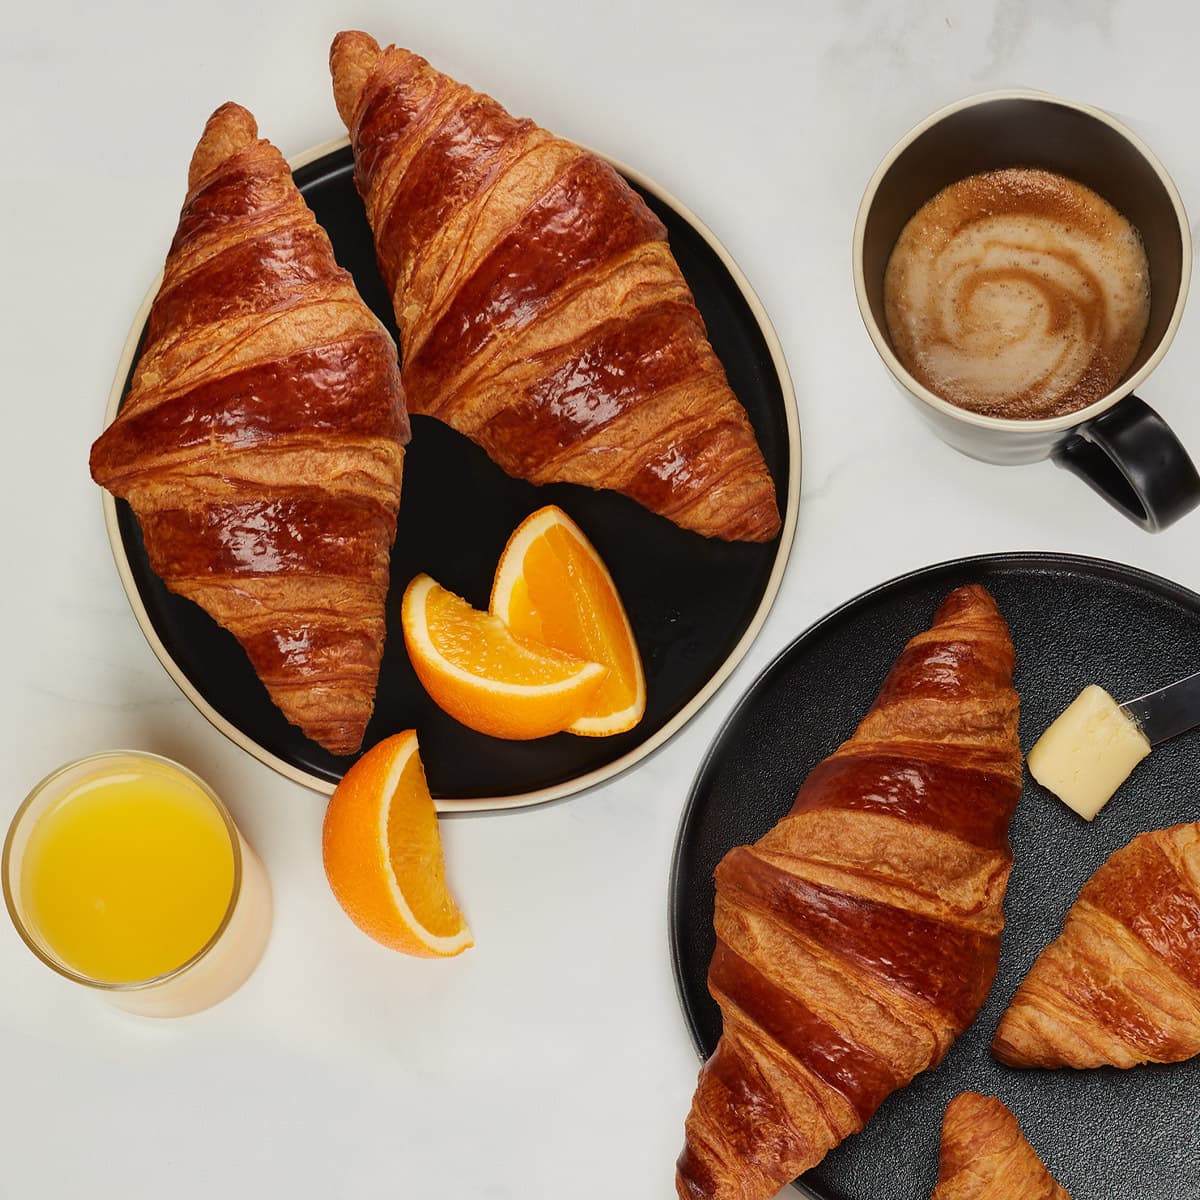 three perfect croissants with an orange juice and a coffee